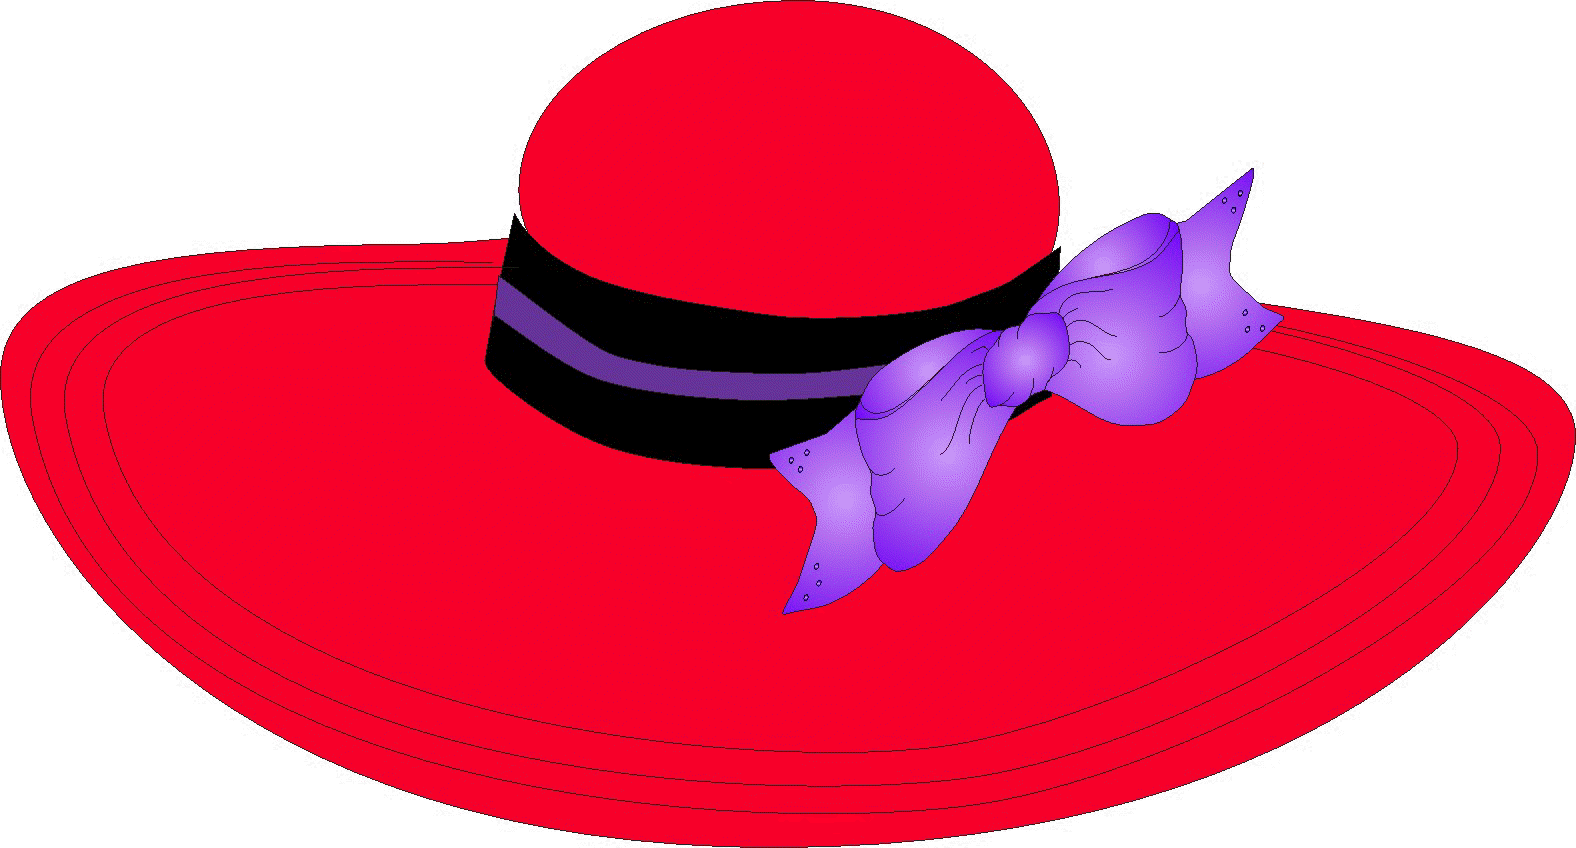 Red Hat Society Logo - Free Red Hat Picture, Download Free Clip Art, Free Clip Art on ...